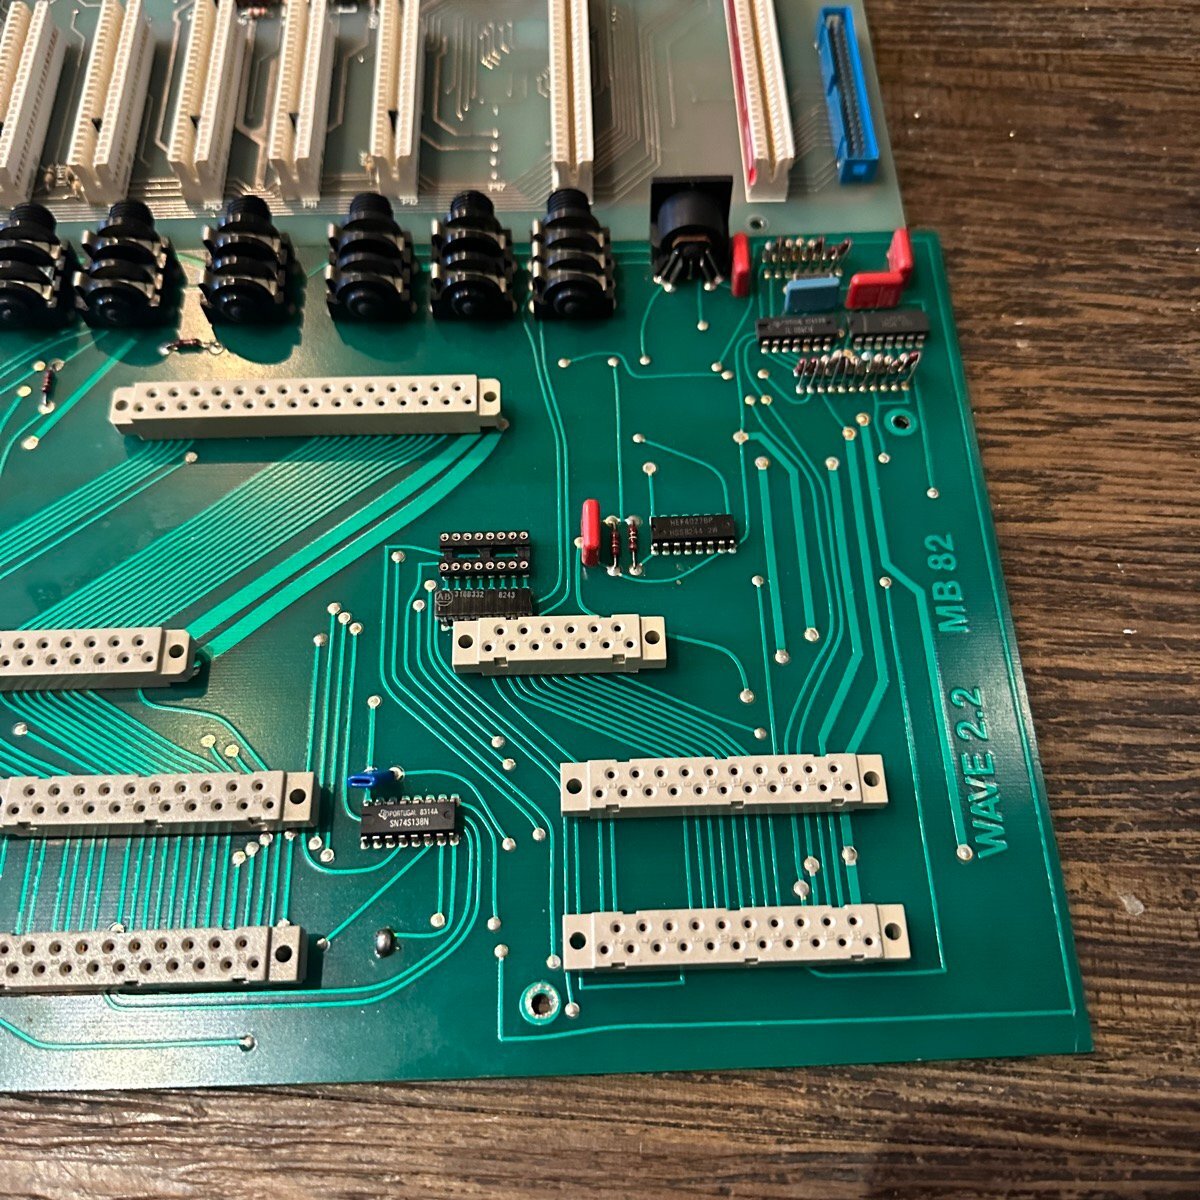 PPG Wave basis board set operation not yet verification part removing synthesizer Junk -e955